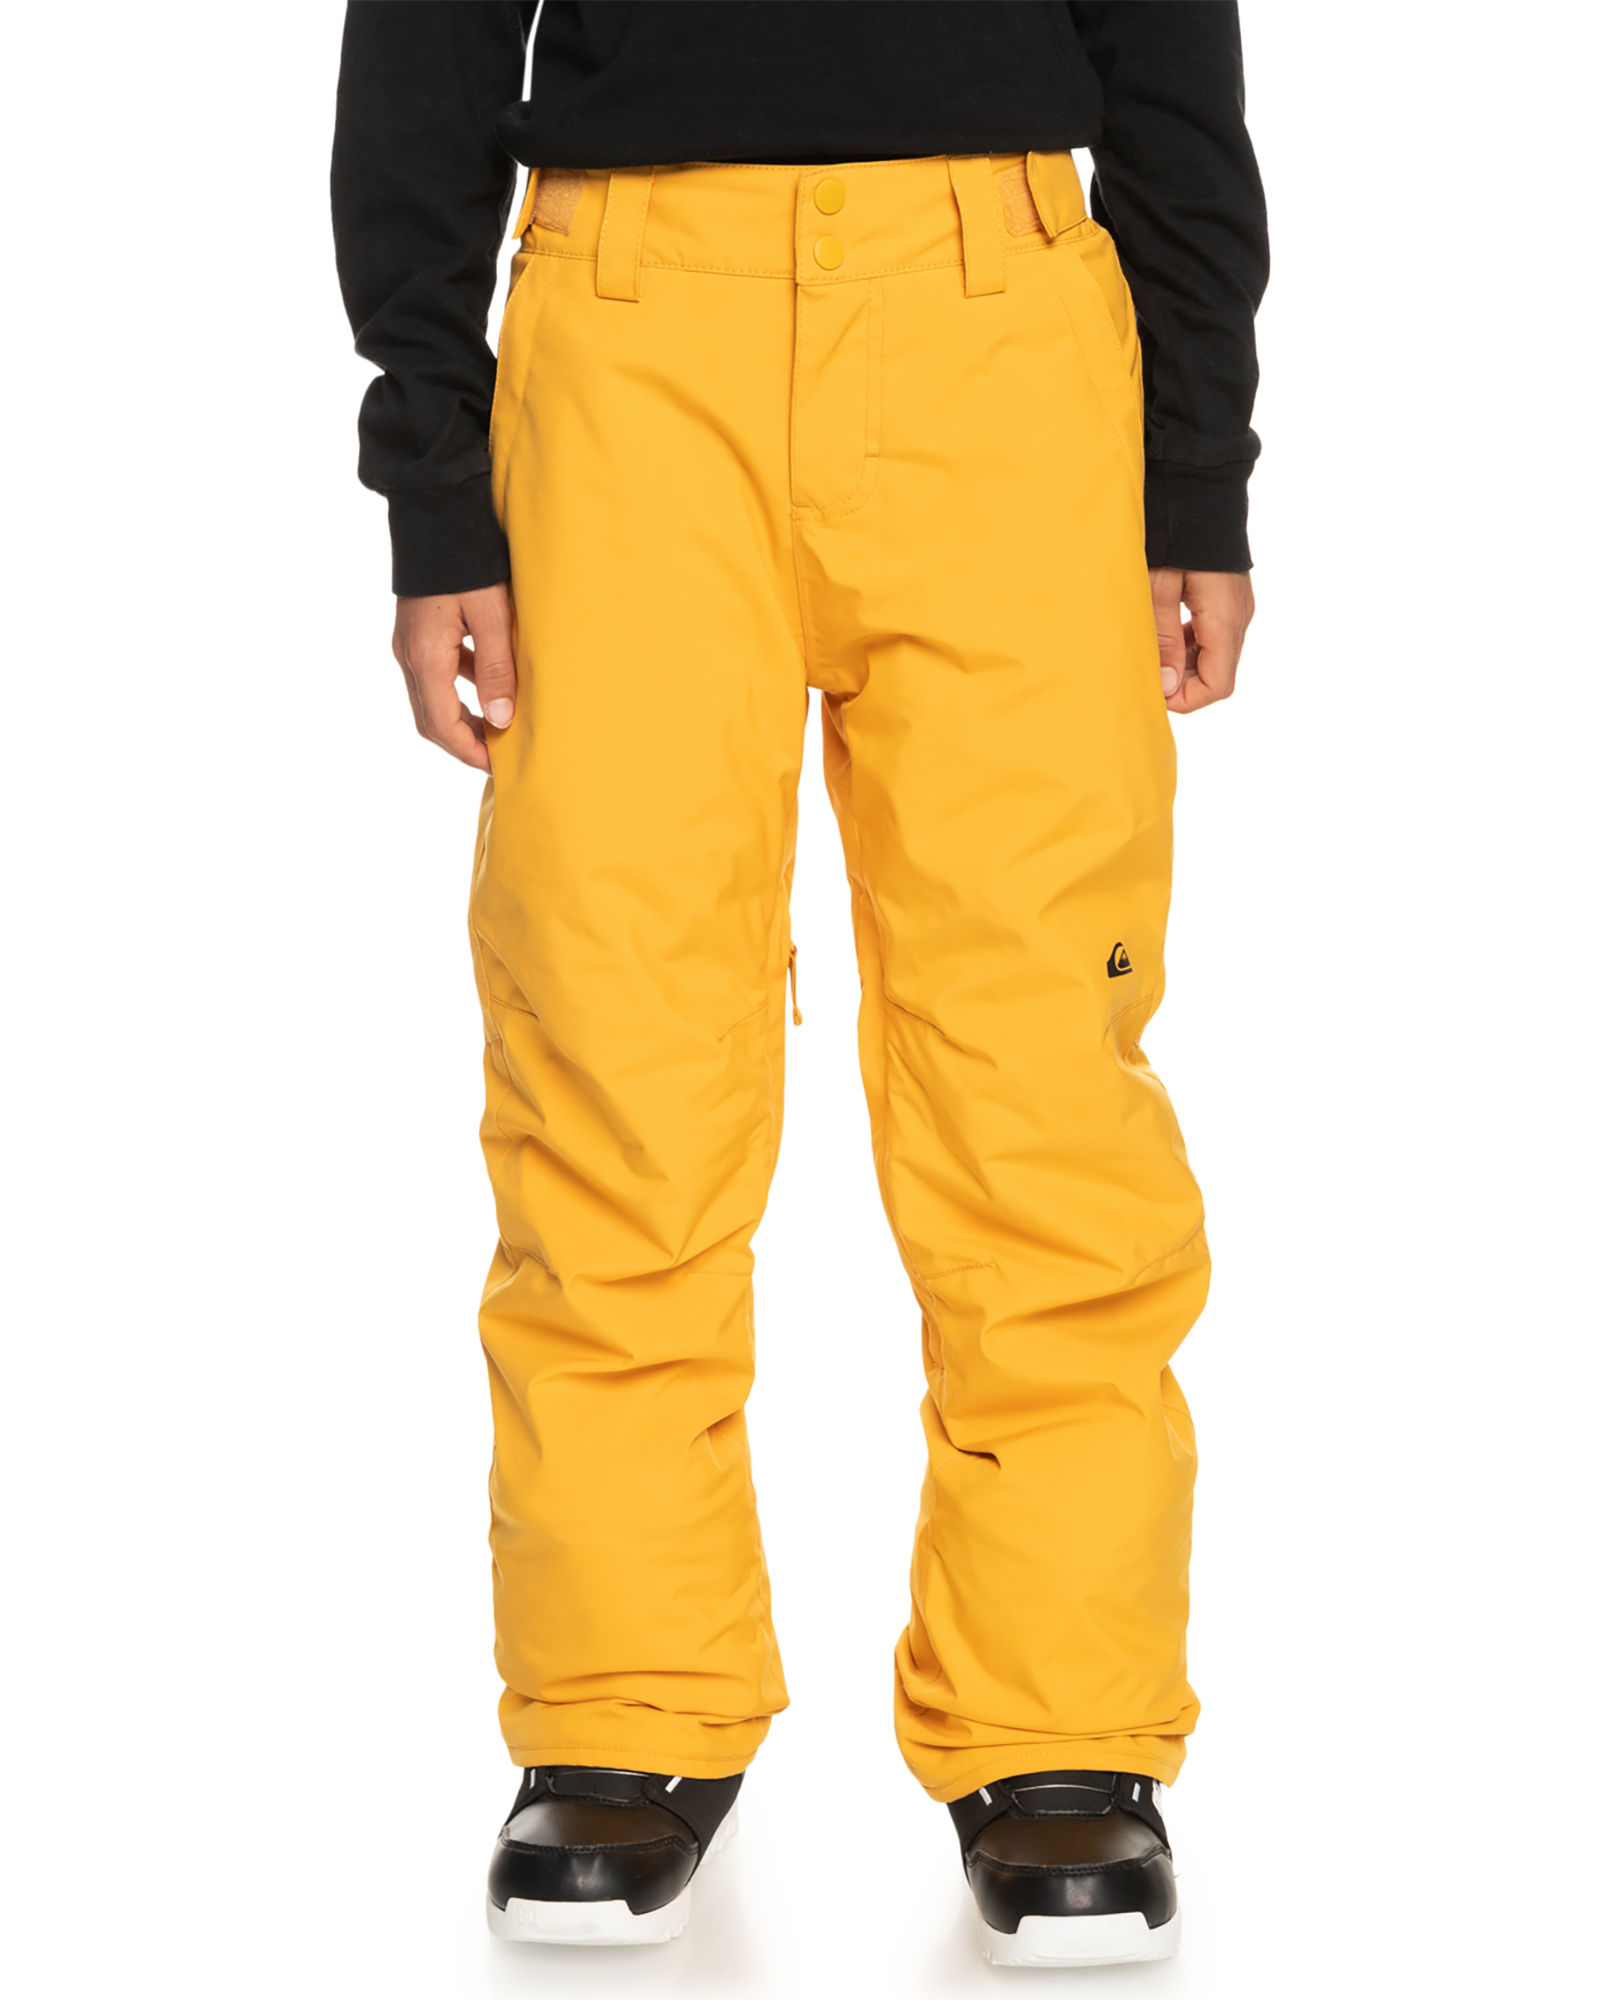 Quiksilver Estate Boys’ Pants K14+ - Mineral Yellow 14 Years